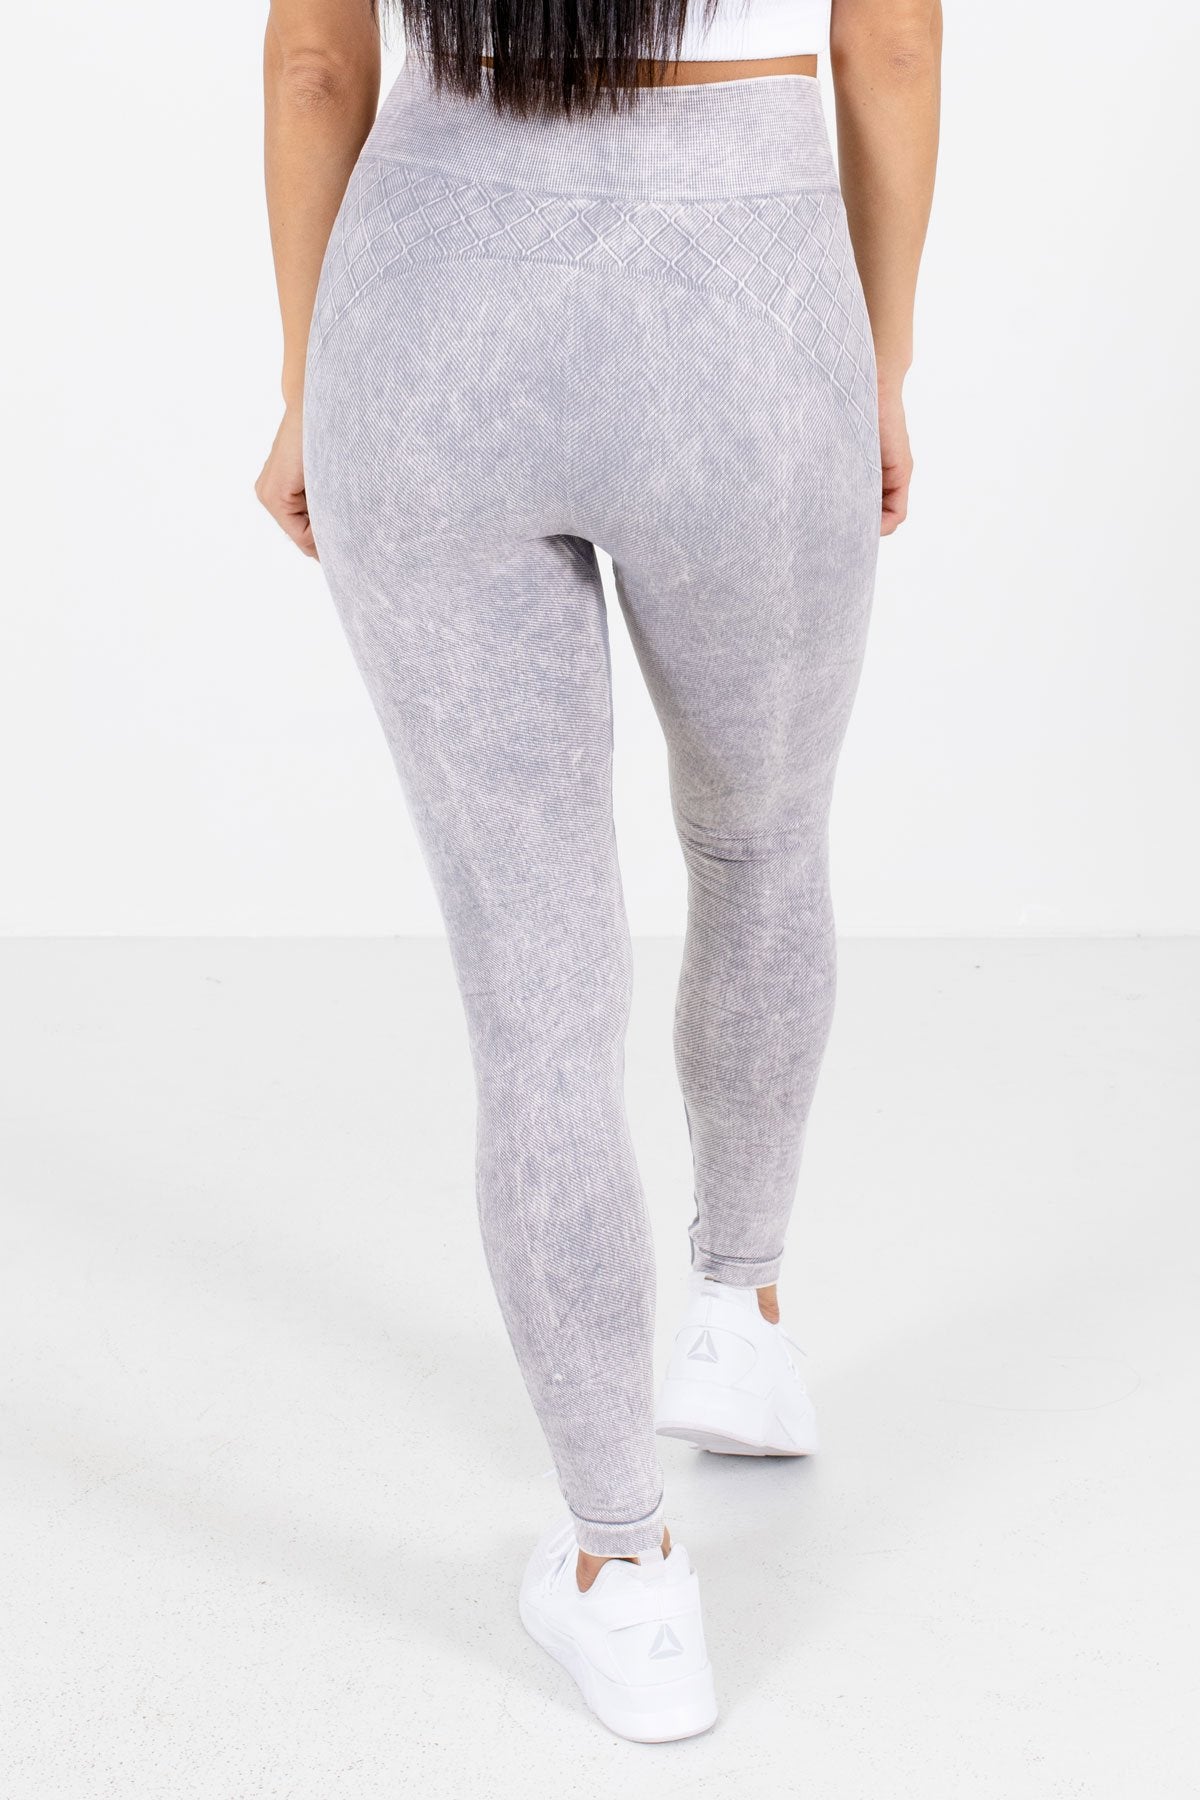 Women's Lavender High Waisted Style Boutique Active Leggings